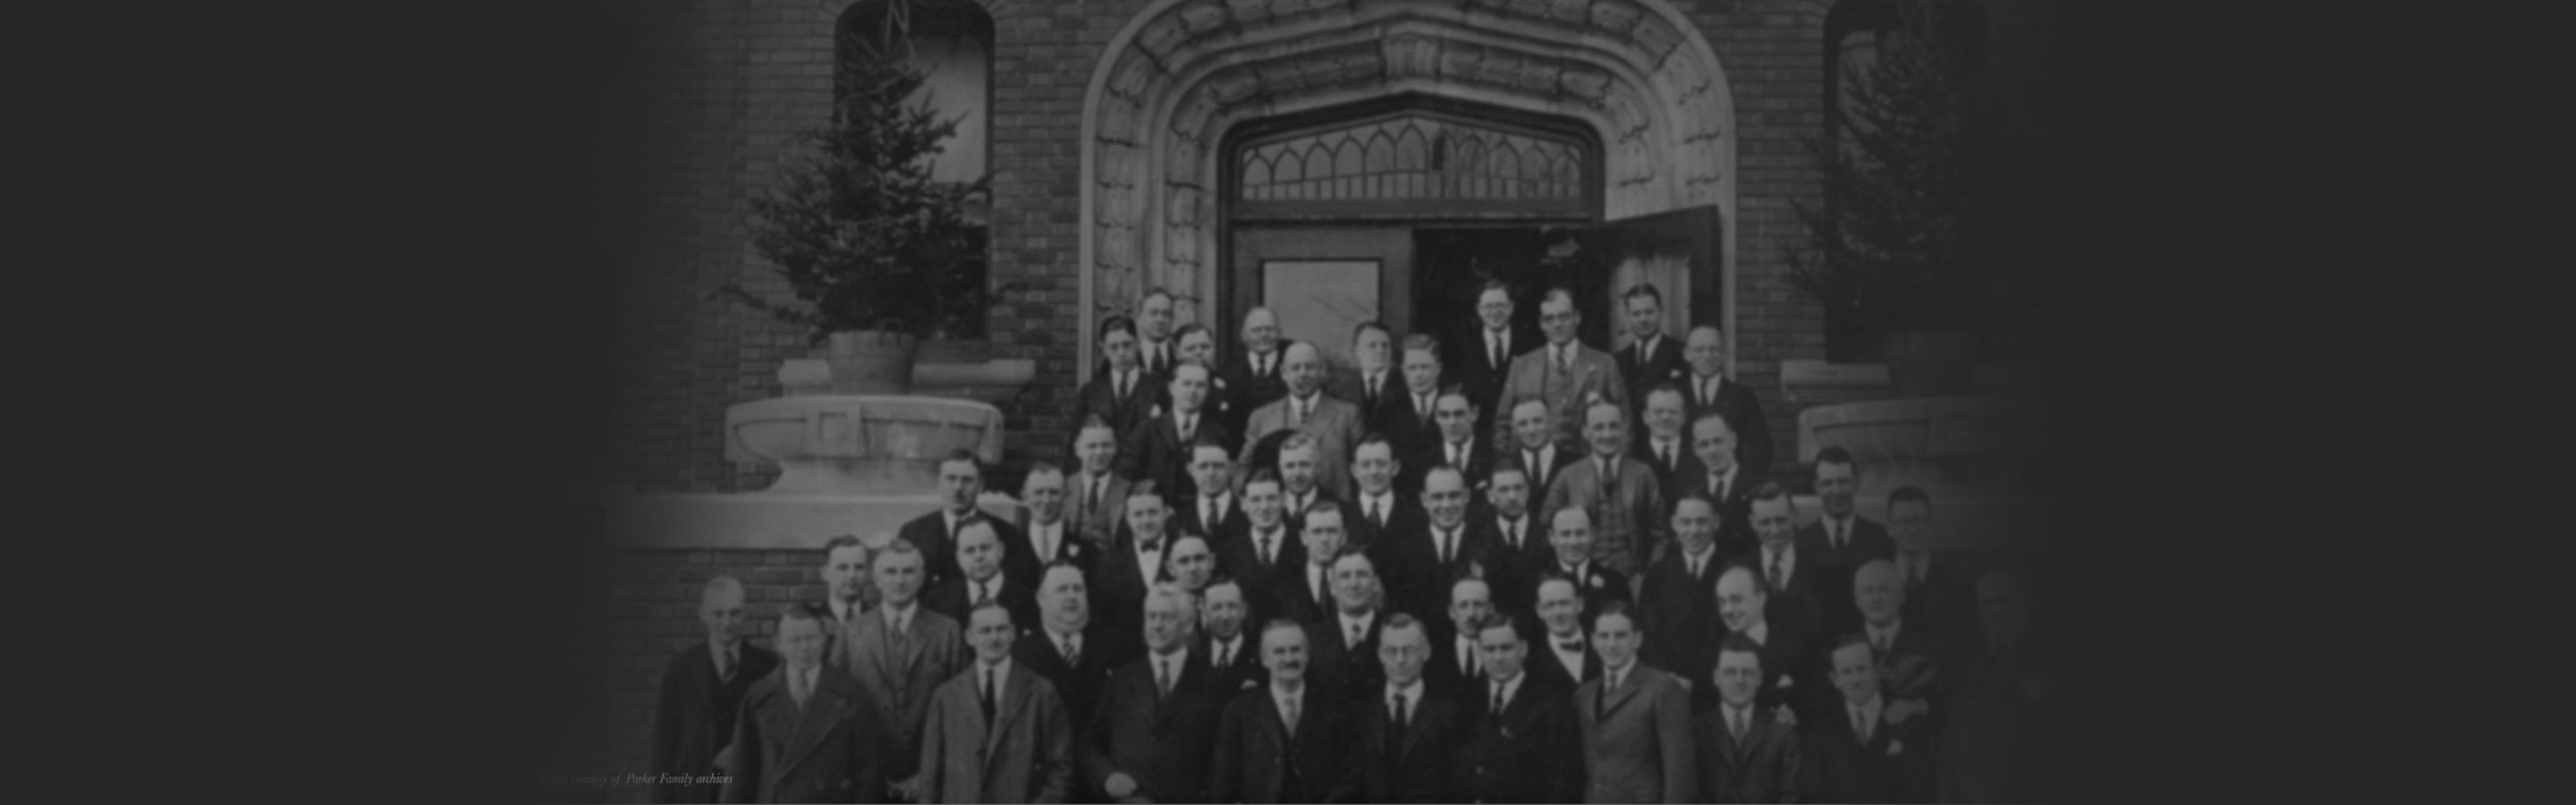 A vintage photograph of many men in suits in front of a building.